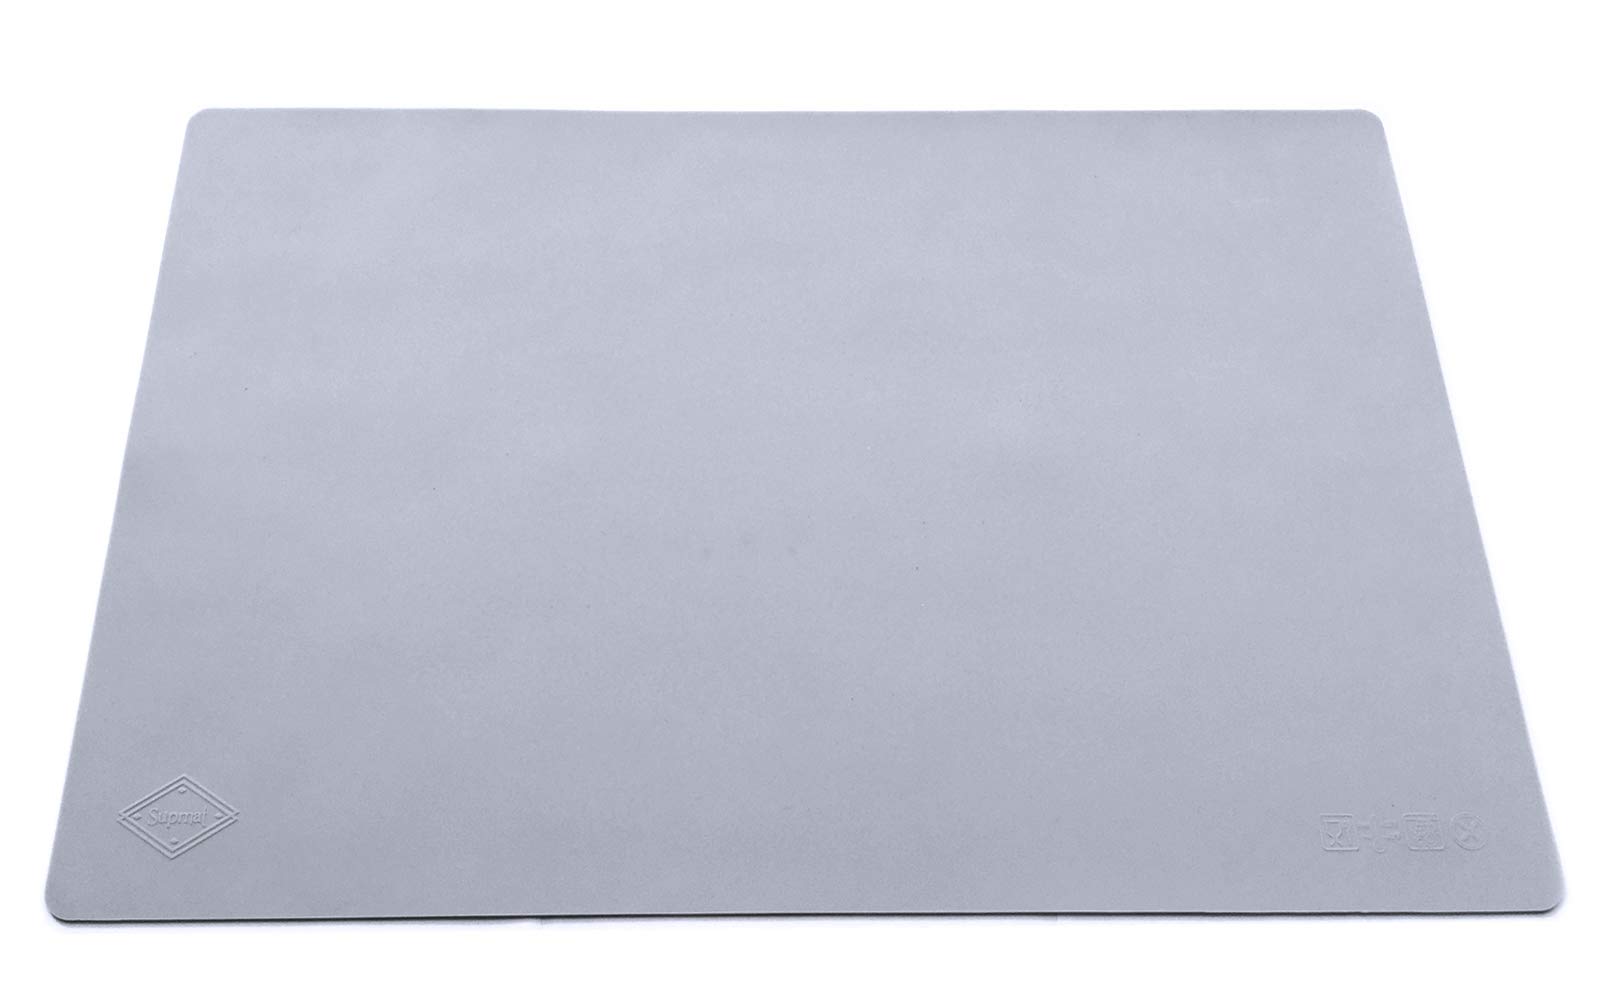 Supmat Xl, Super Versatile Extra Large And Thick Heat Resistant Silicone  Mat, Counter Mat (1, Light Gray)